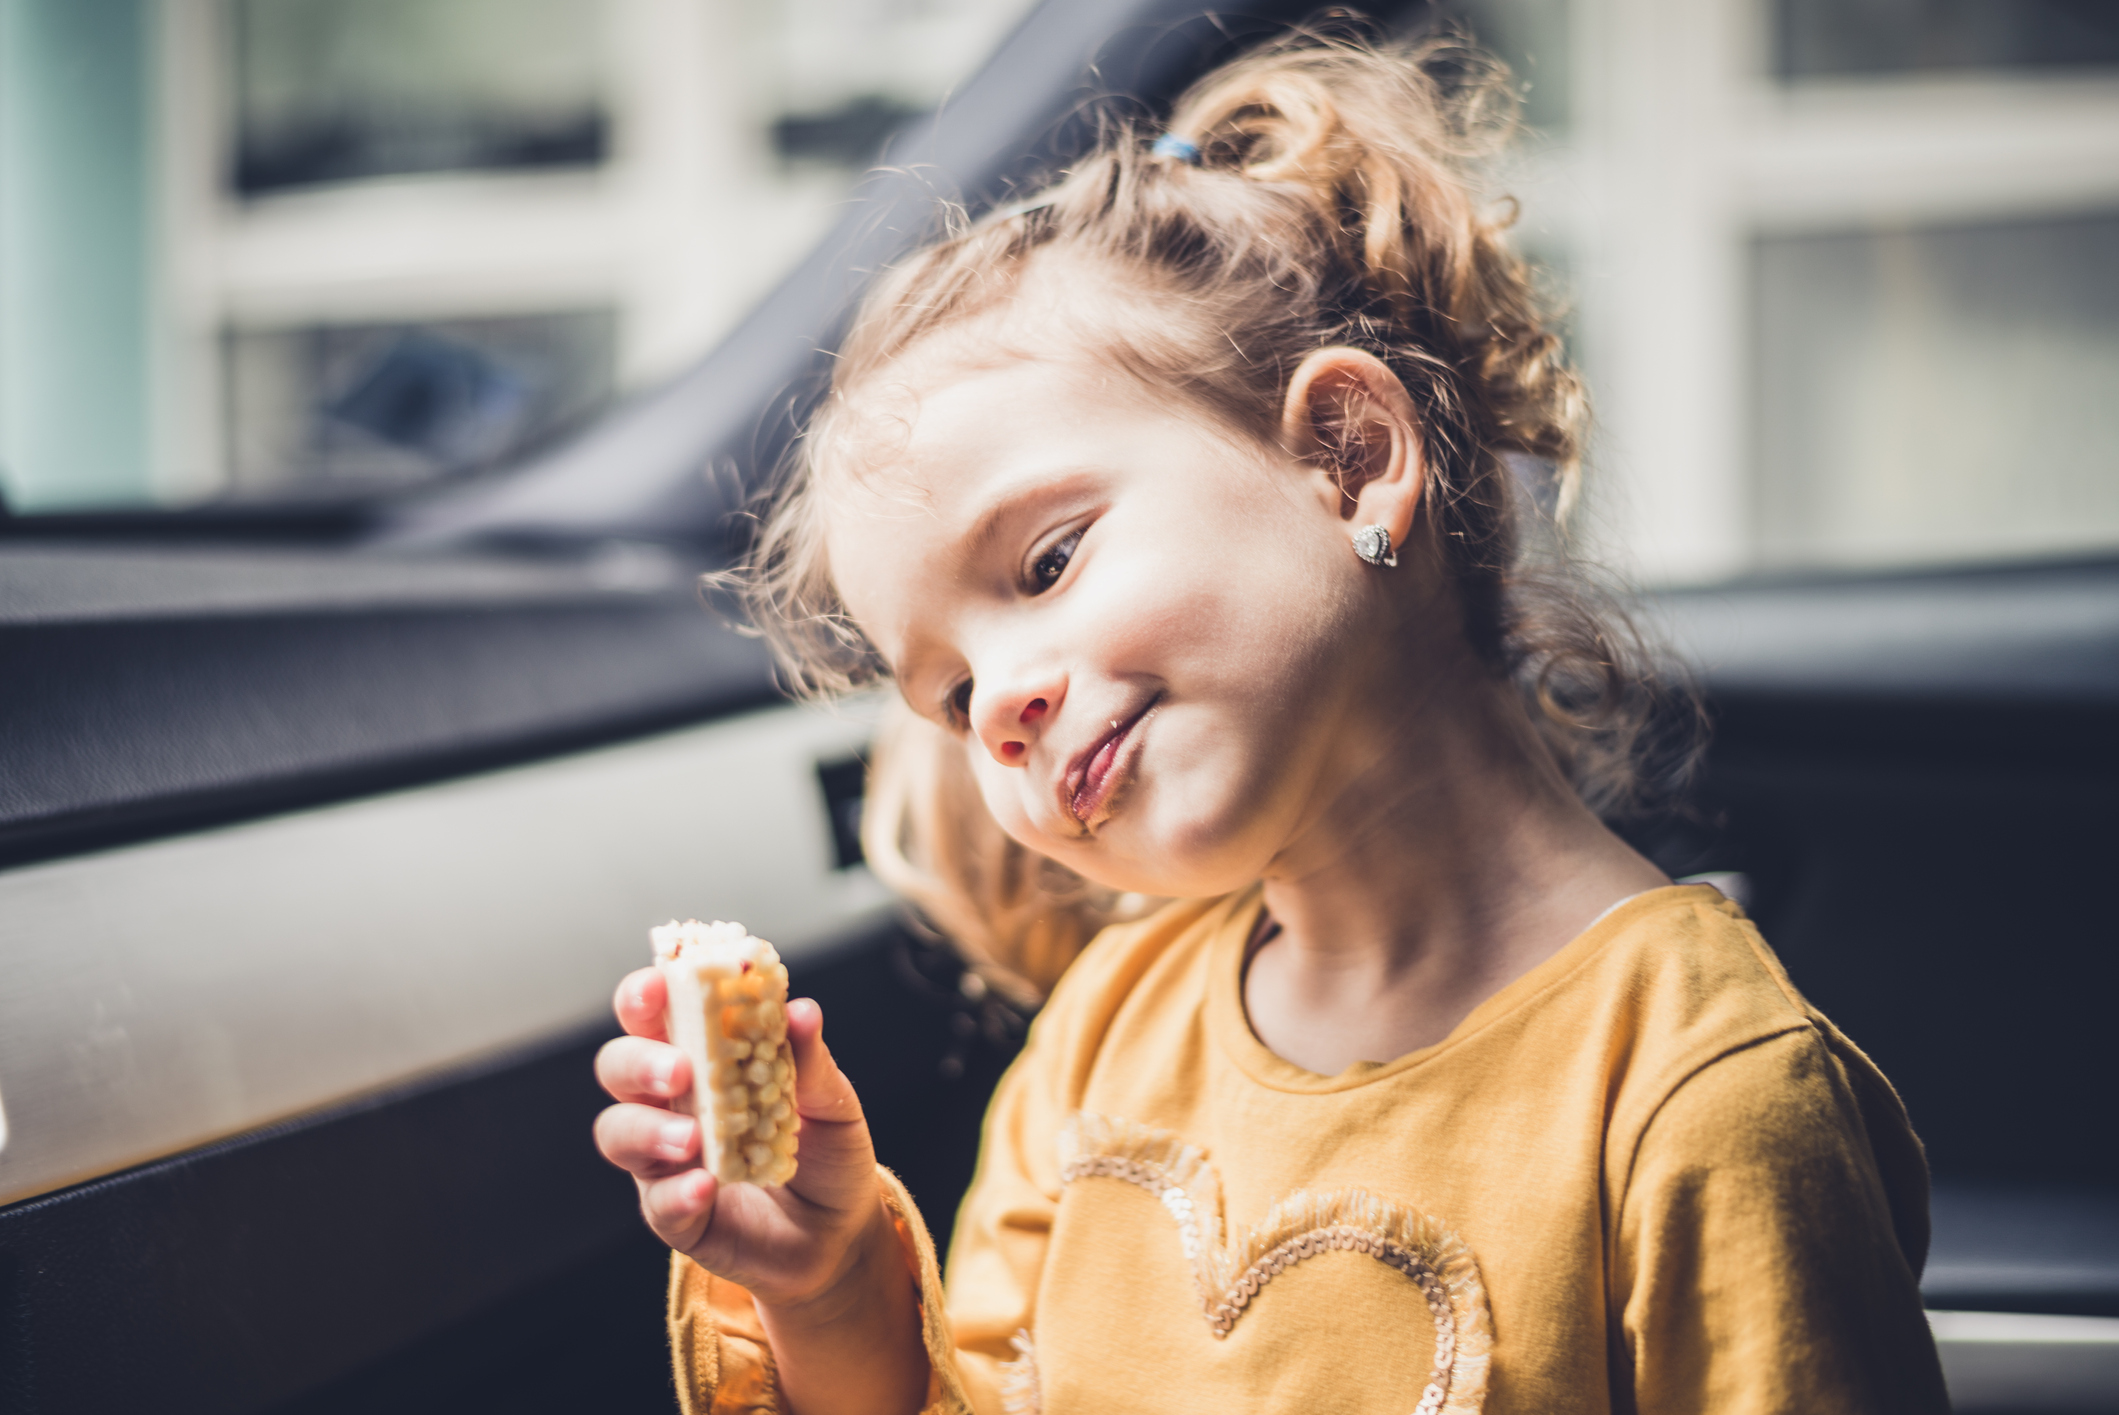 A young girl eats a low-sugar snack in the car.